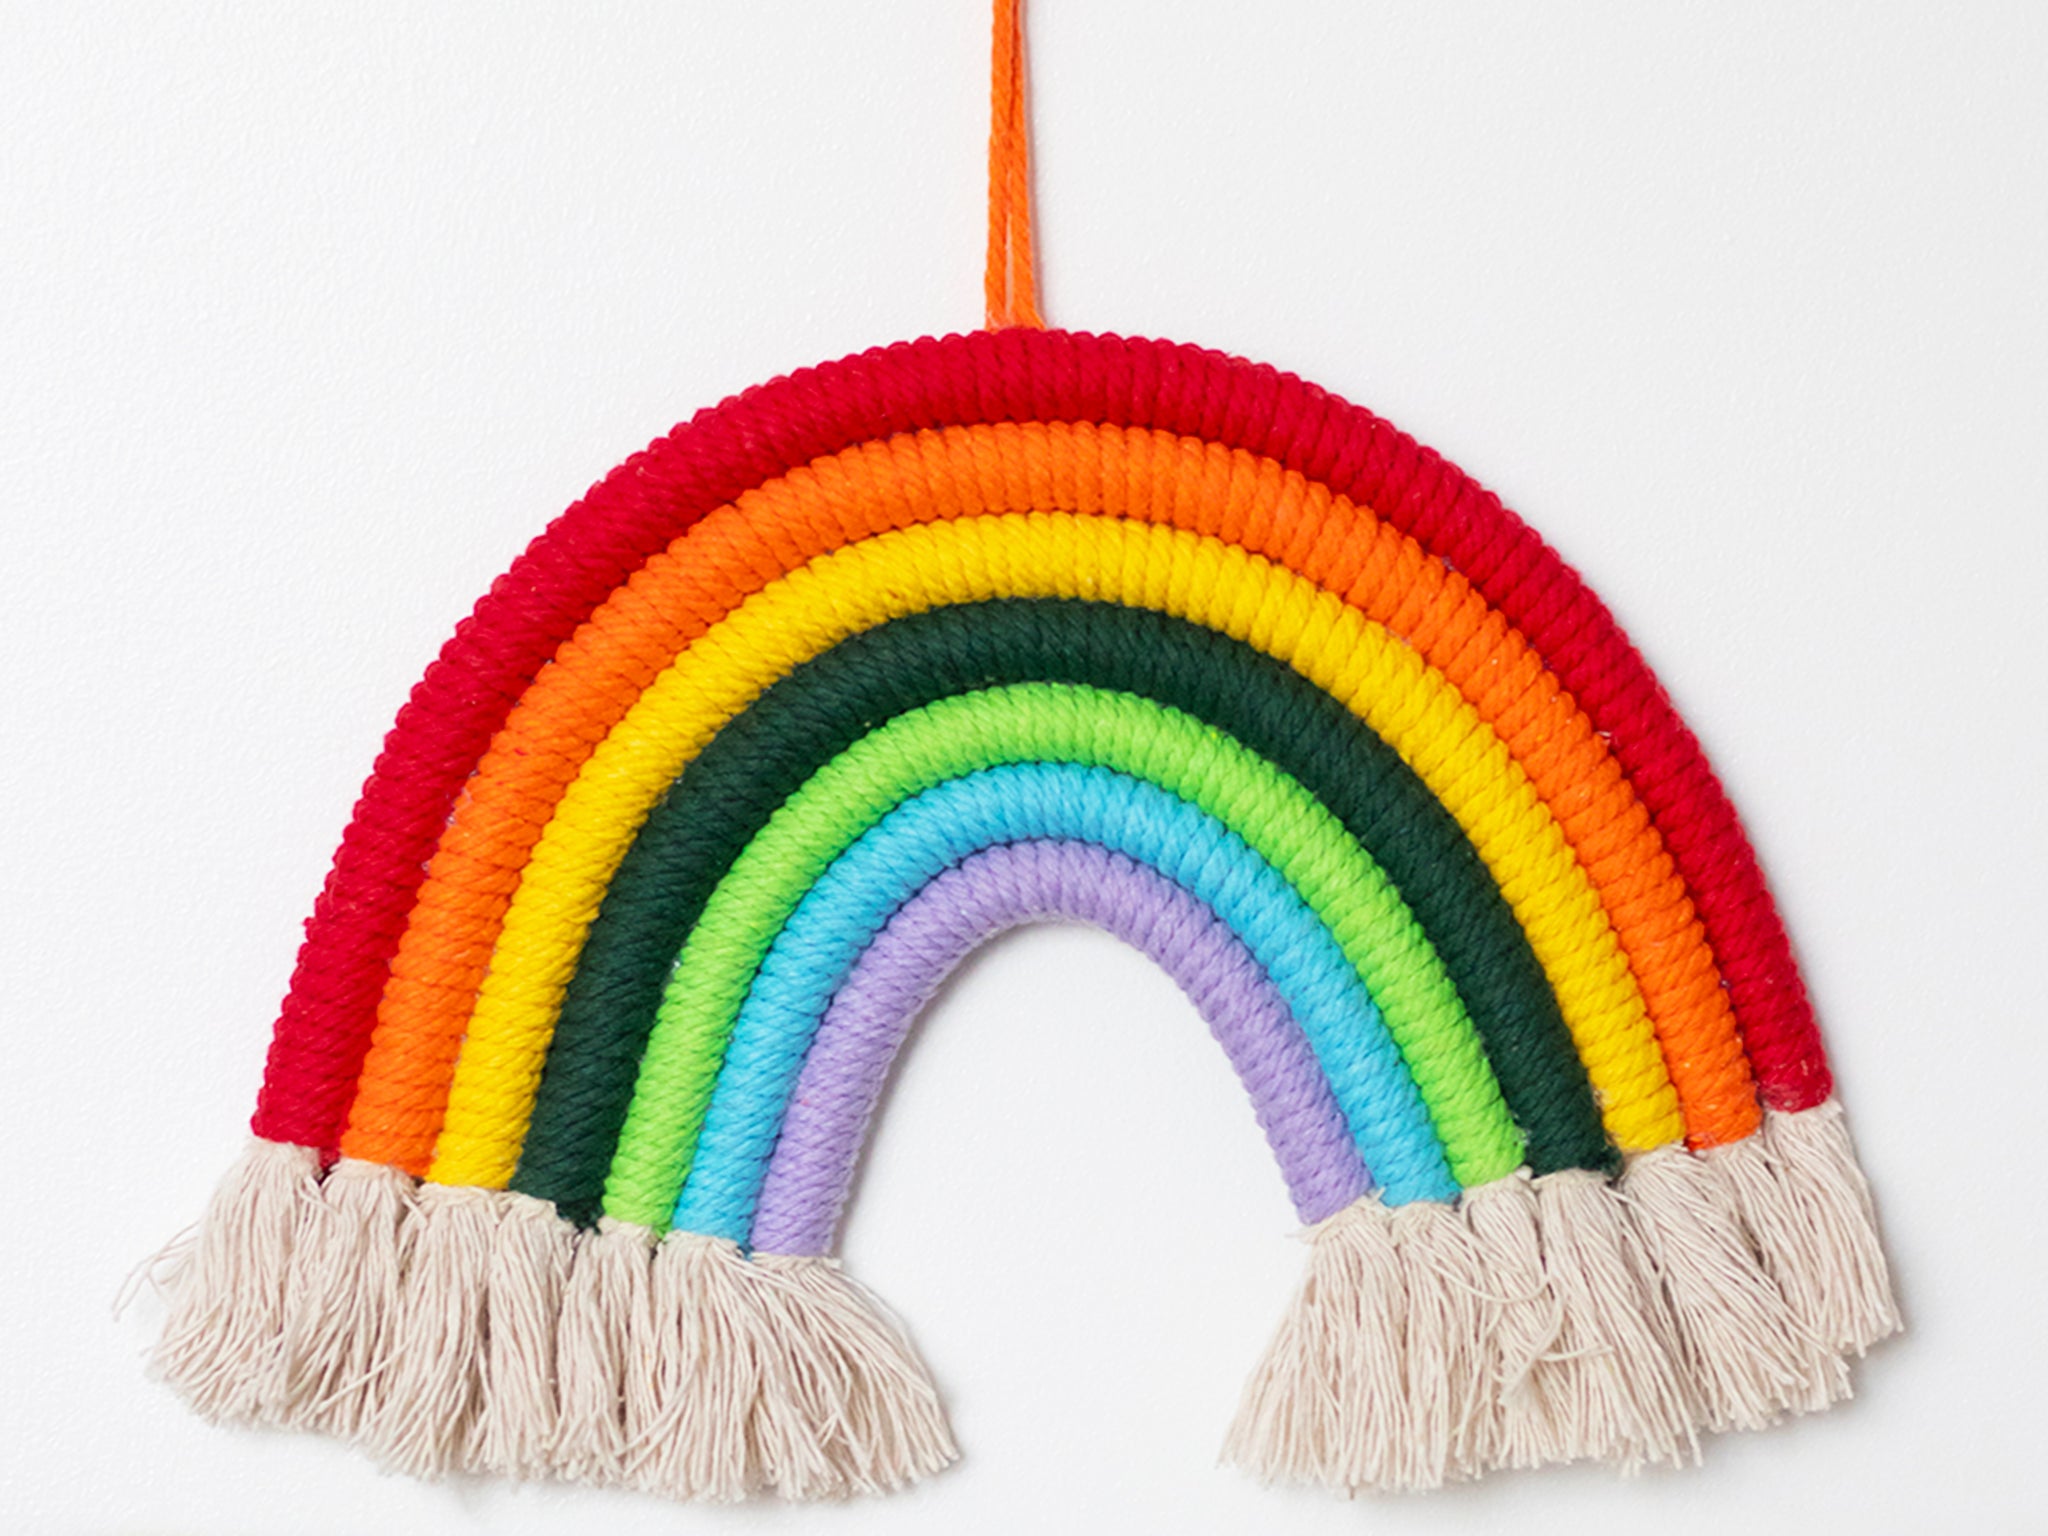 Rainbow Wall Hanging Decoration - LGBT Gifts - Pride Celebrations